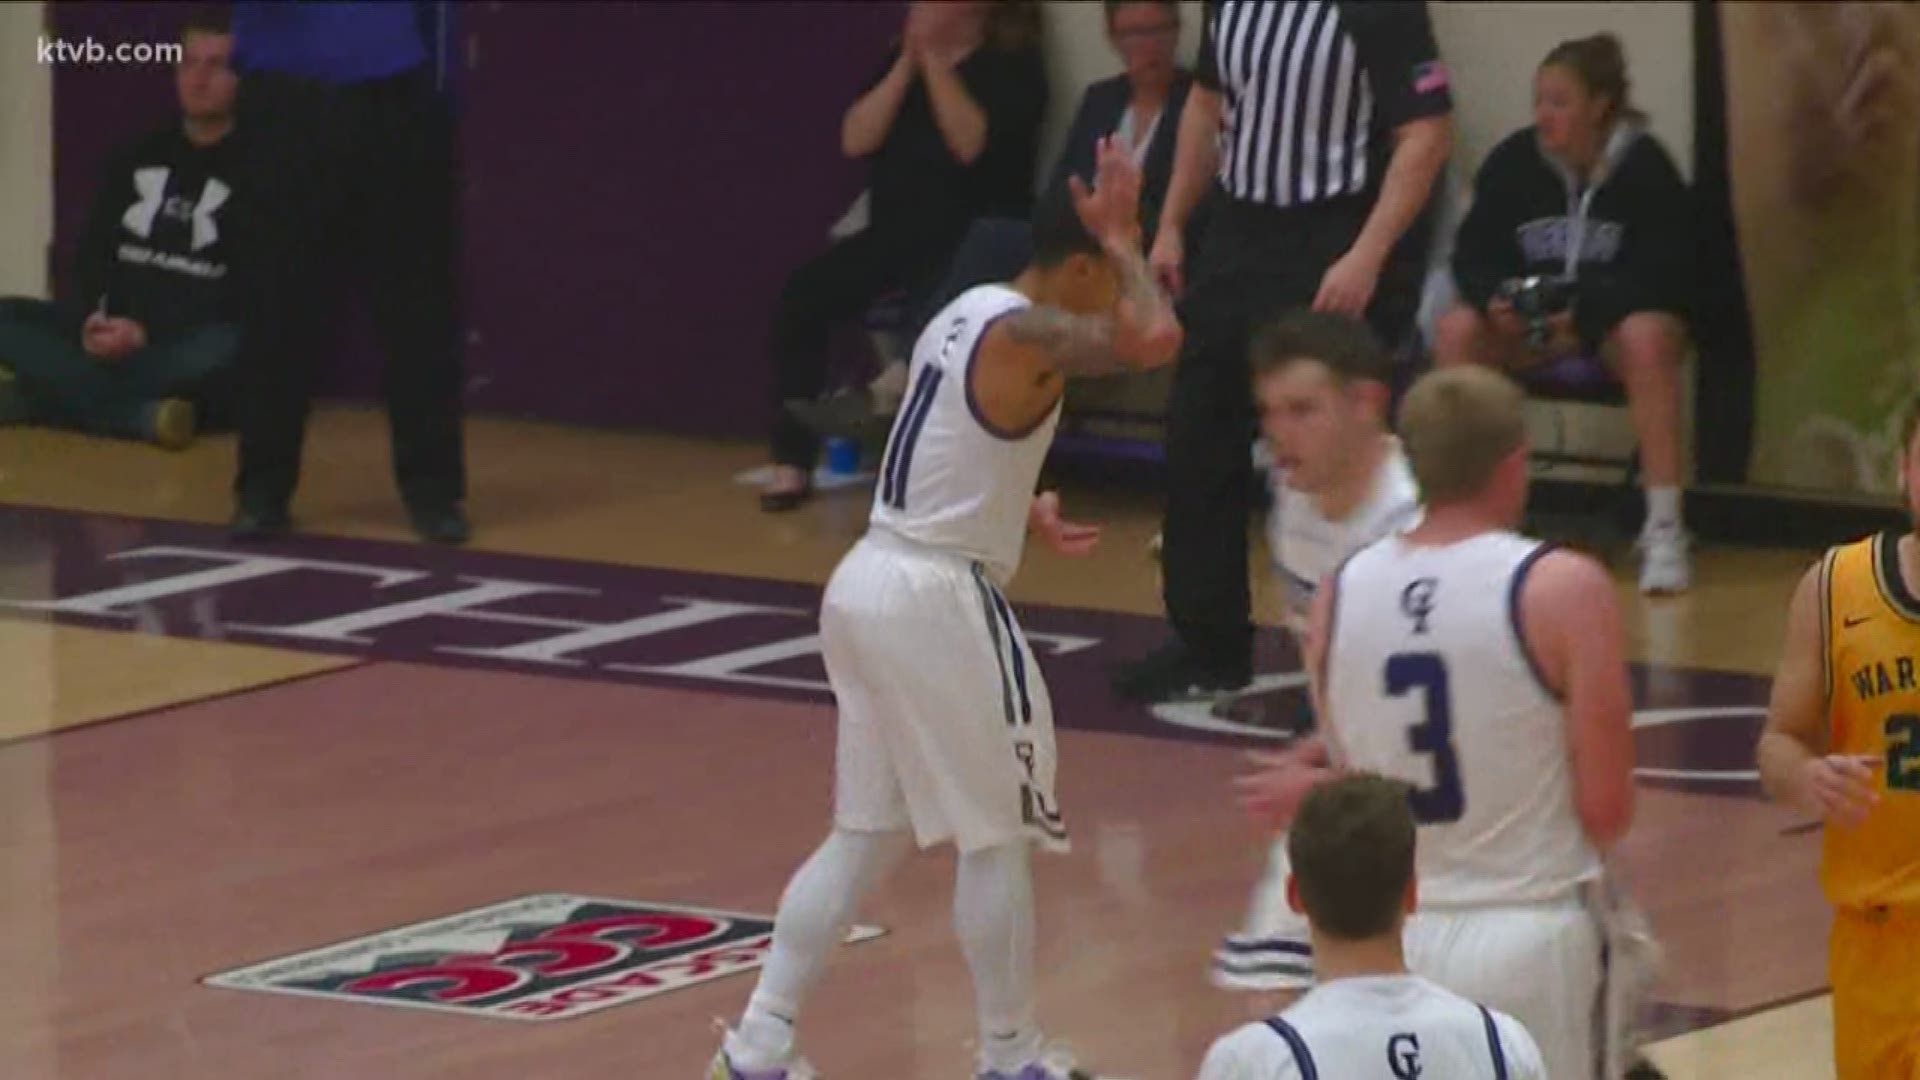 College of Idaho vs. Corban Warriors men's basketball highlights from the CCC tournament.